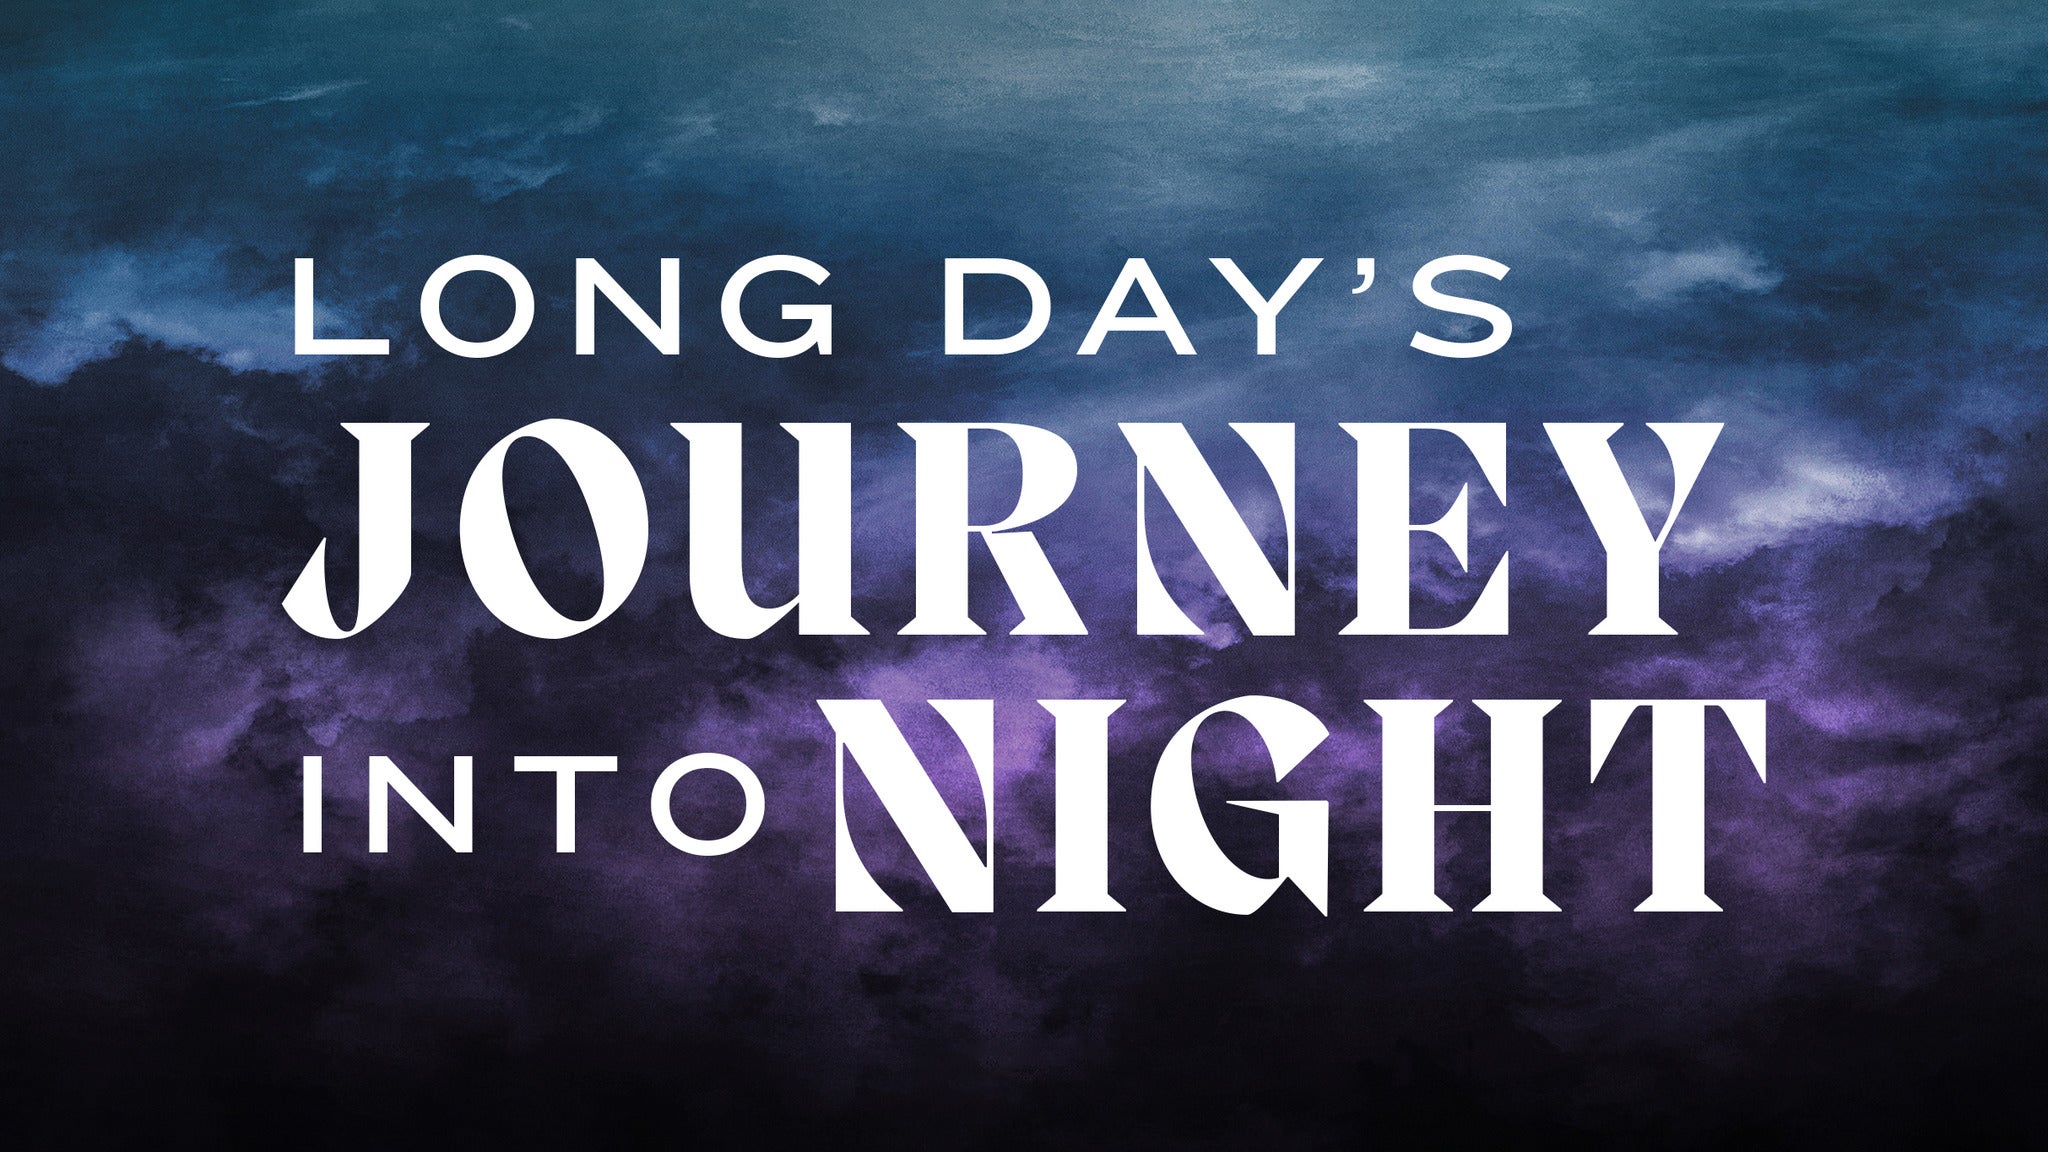 a hard day's journey into night